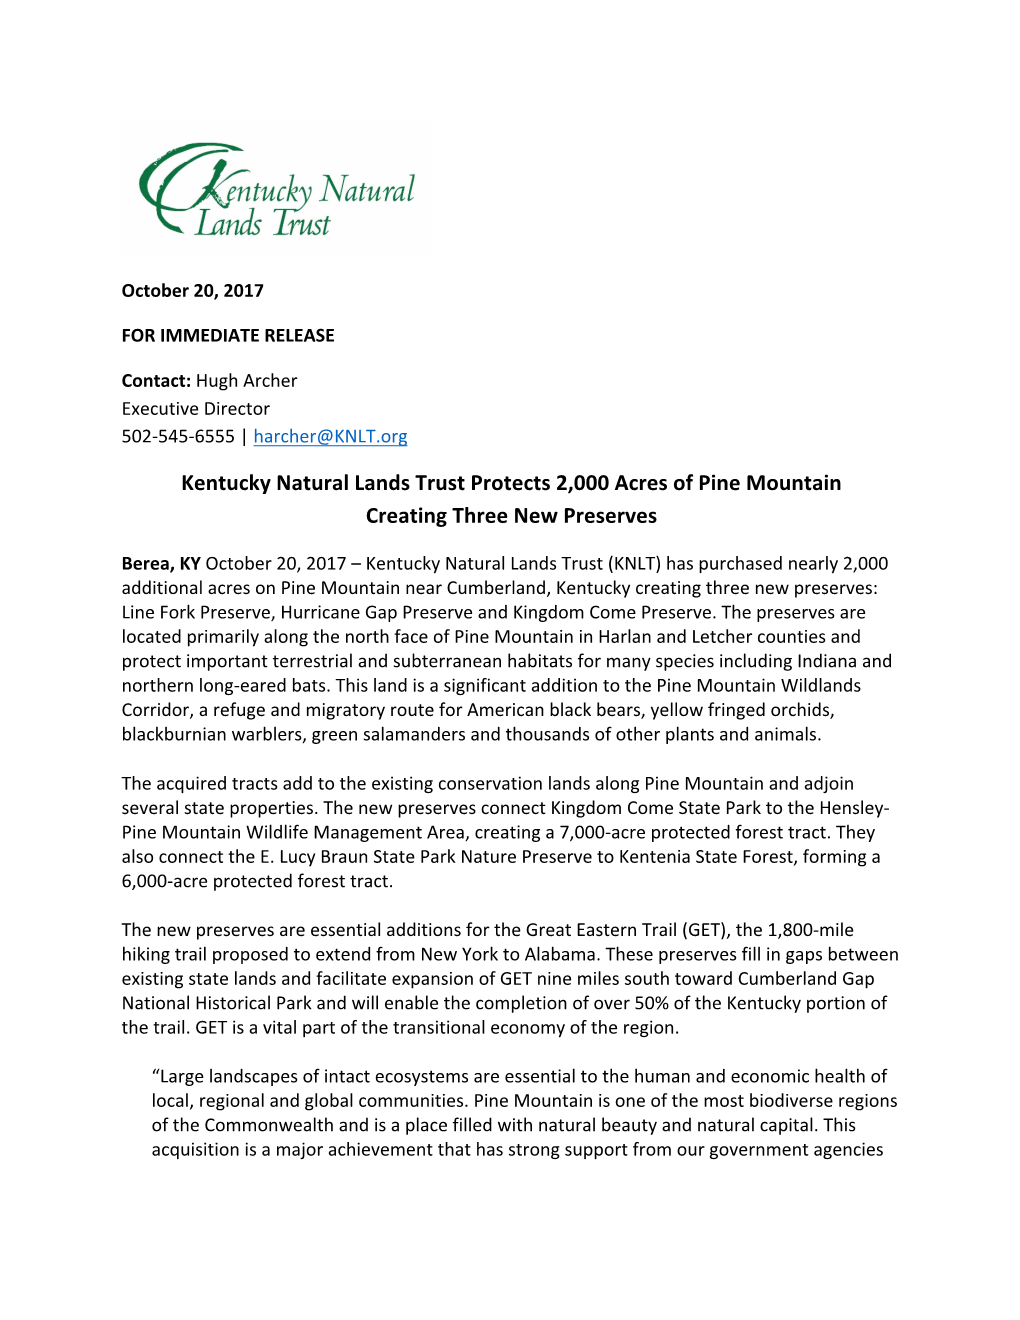 Kentucky Natural Lands Trust Protects 2,000 Acres of Pine Mountain Creating Three New Preserves